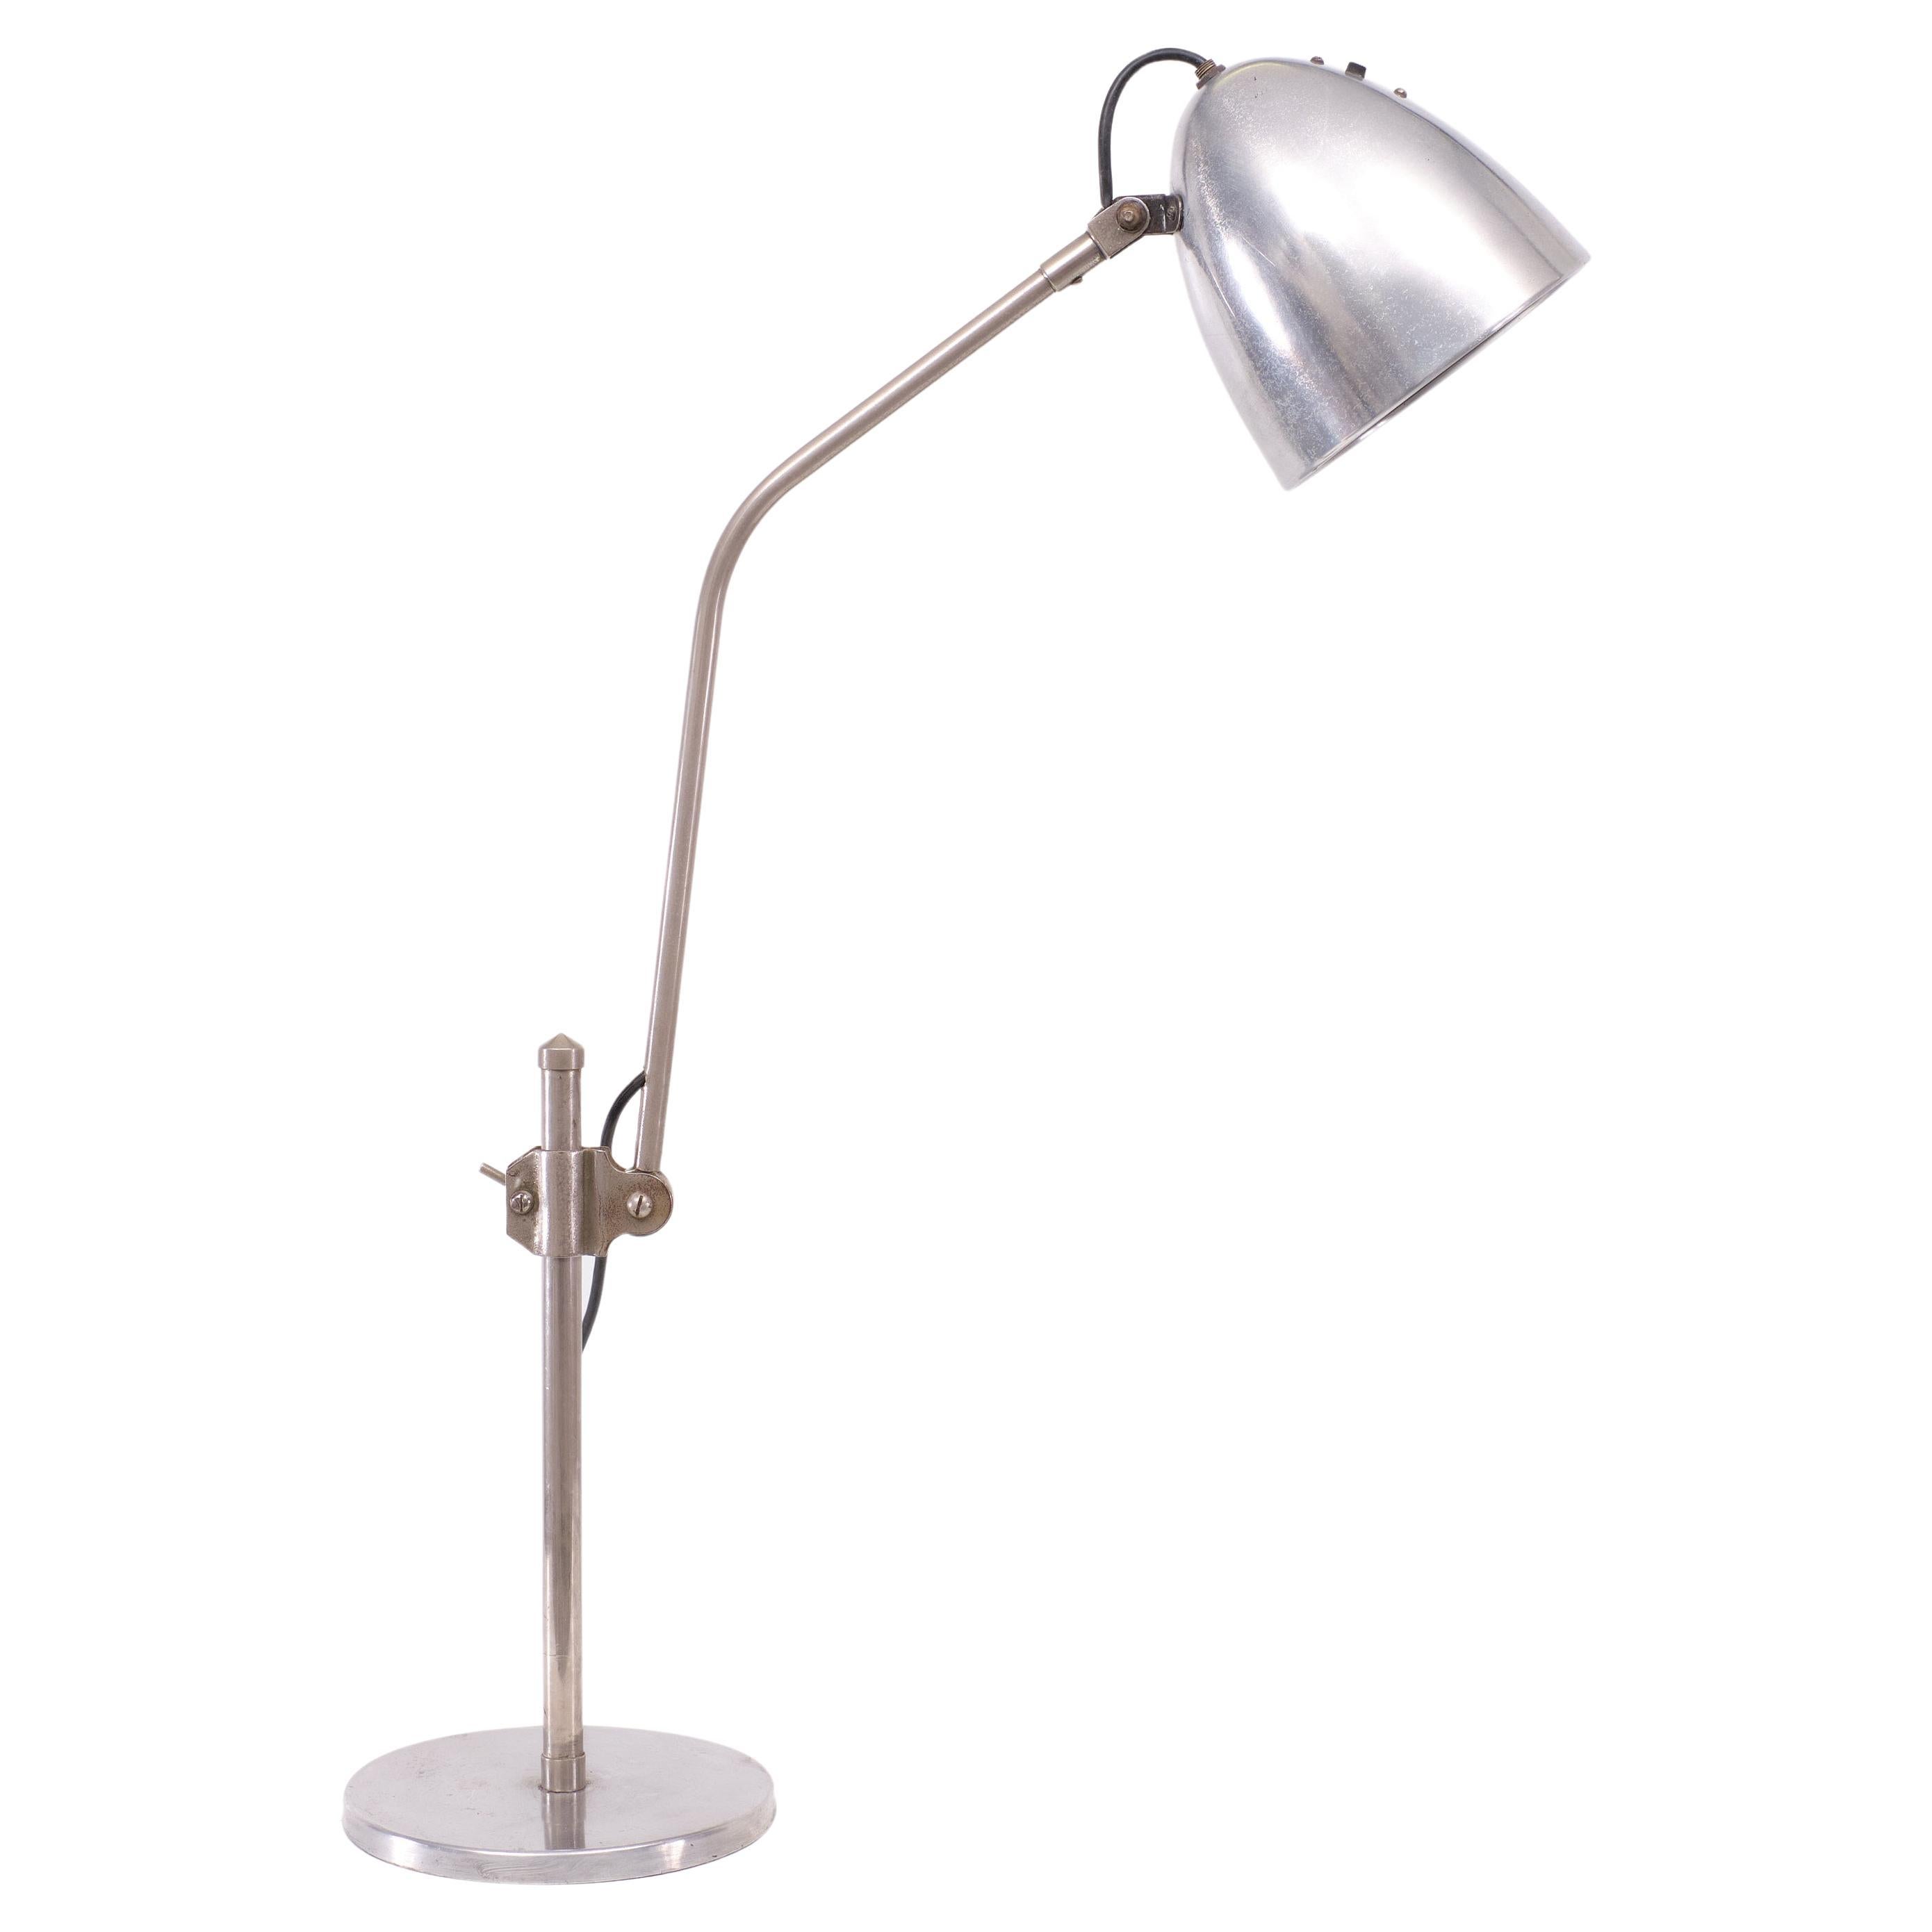 A rare early twentieth century task lamp attributed to Bauhaus designer Christian Dell, Aluminum  finish to shade and base. The circular shade pivots on a retractable arm, which in turn can be adjusted at various angles and heights from the base